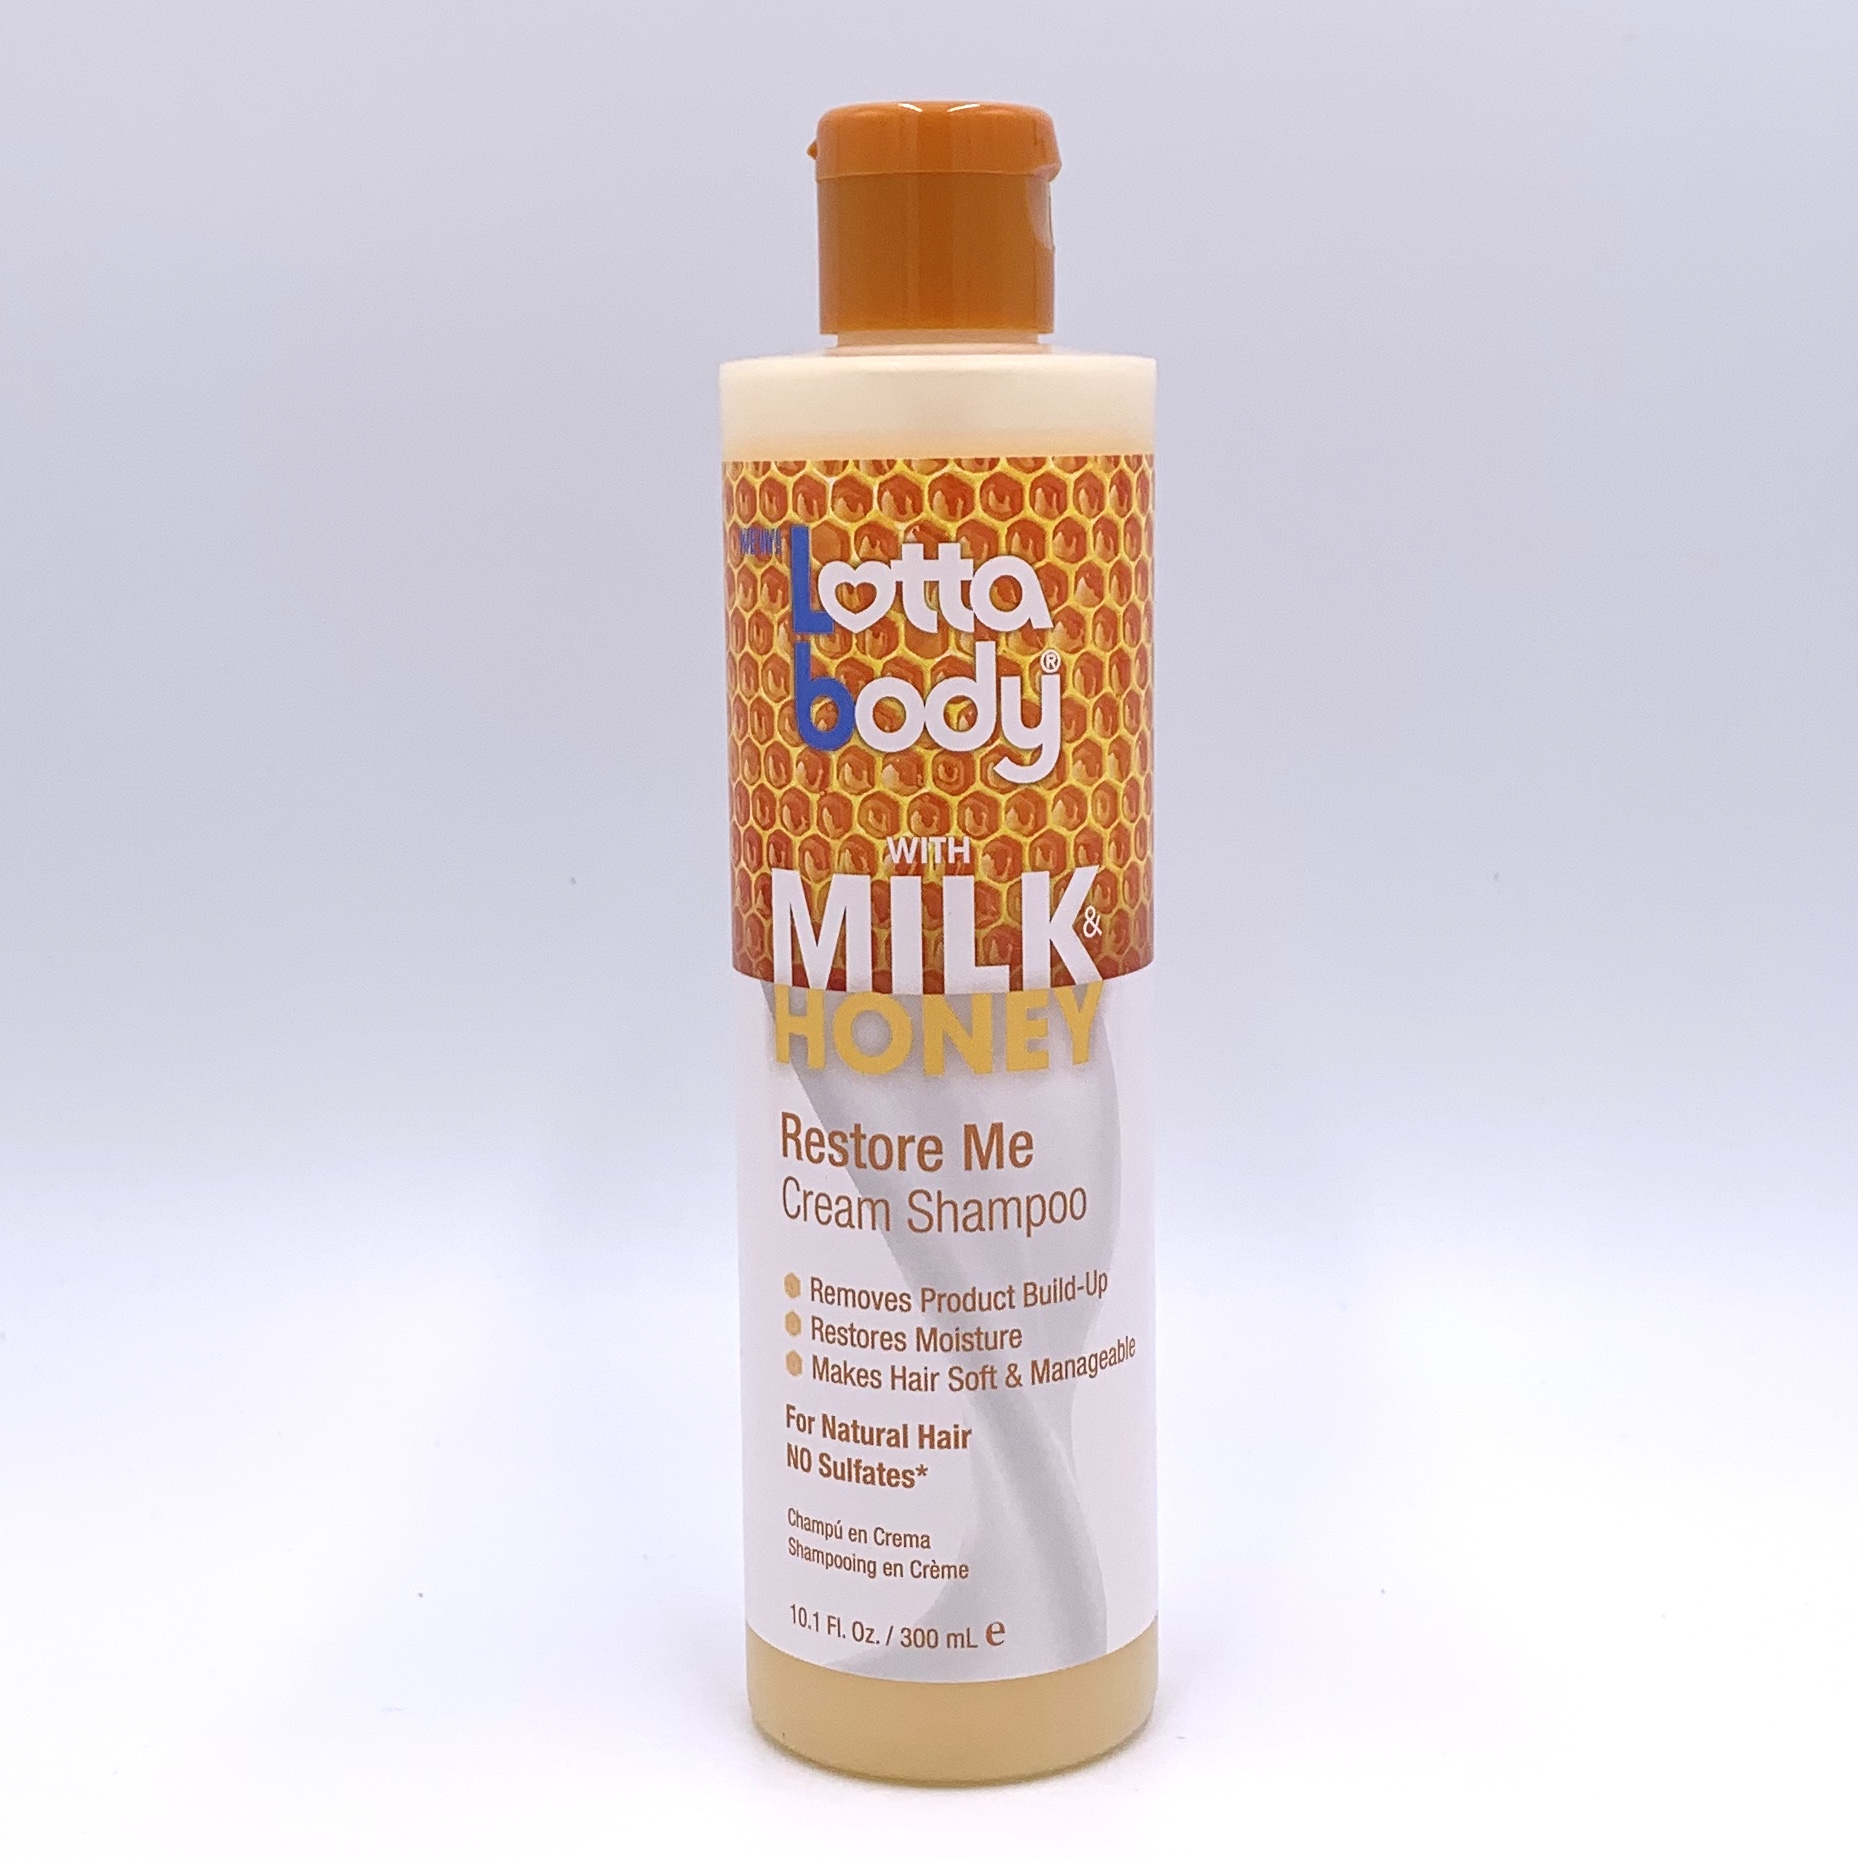 LottaBody Restore Me Cream Shampoo Front for Cocotique August 2020